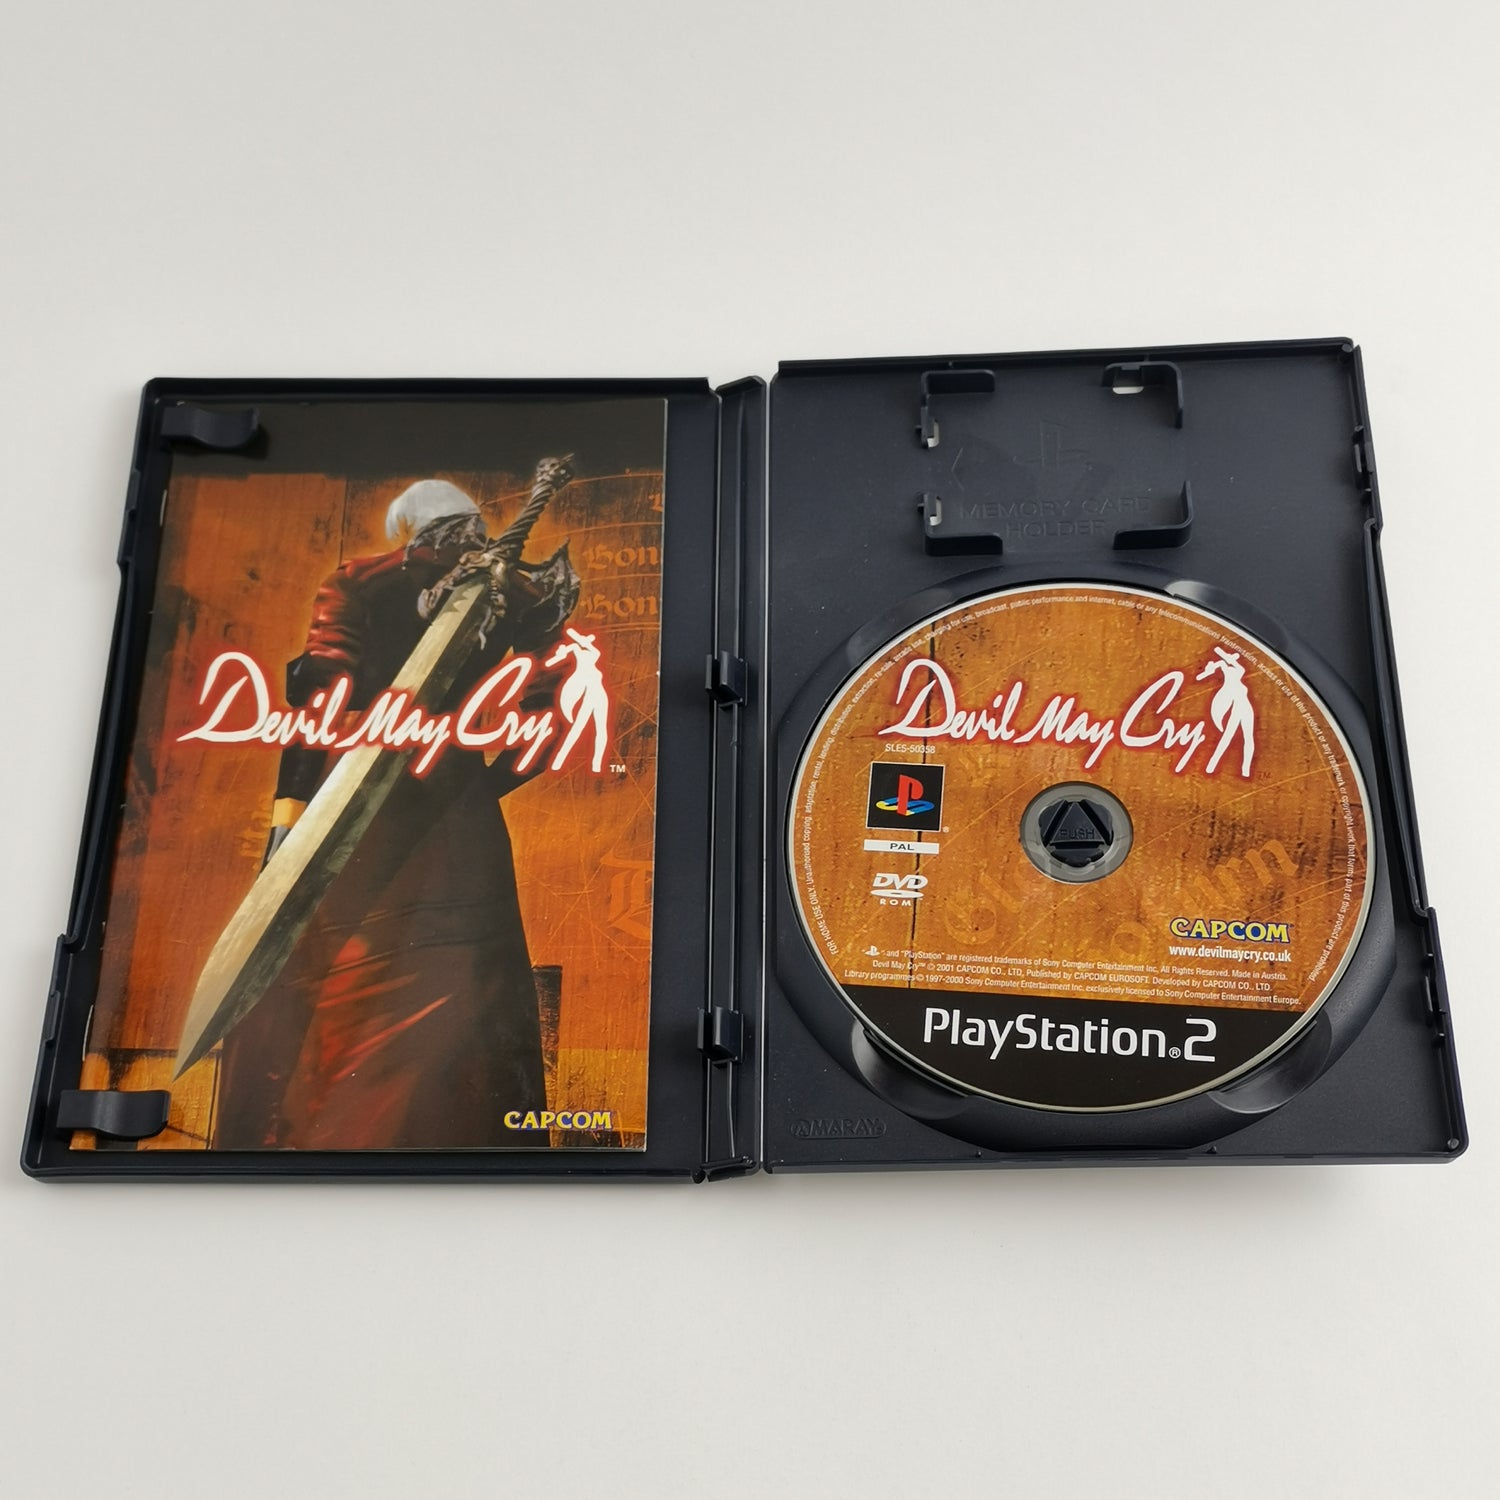 Sony Playstation 2 Game: Devil May Cry + GamePress Game Solution | PS2 OVP PAL